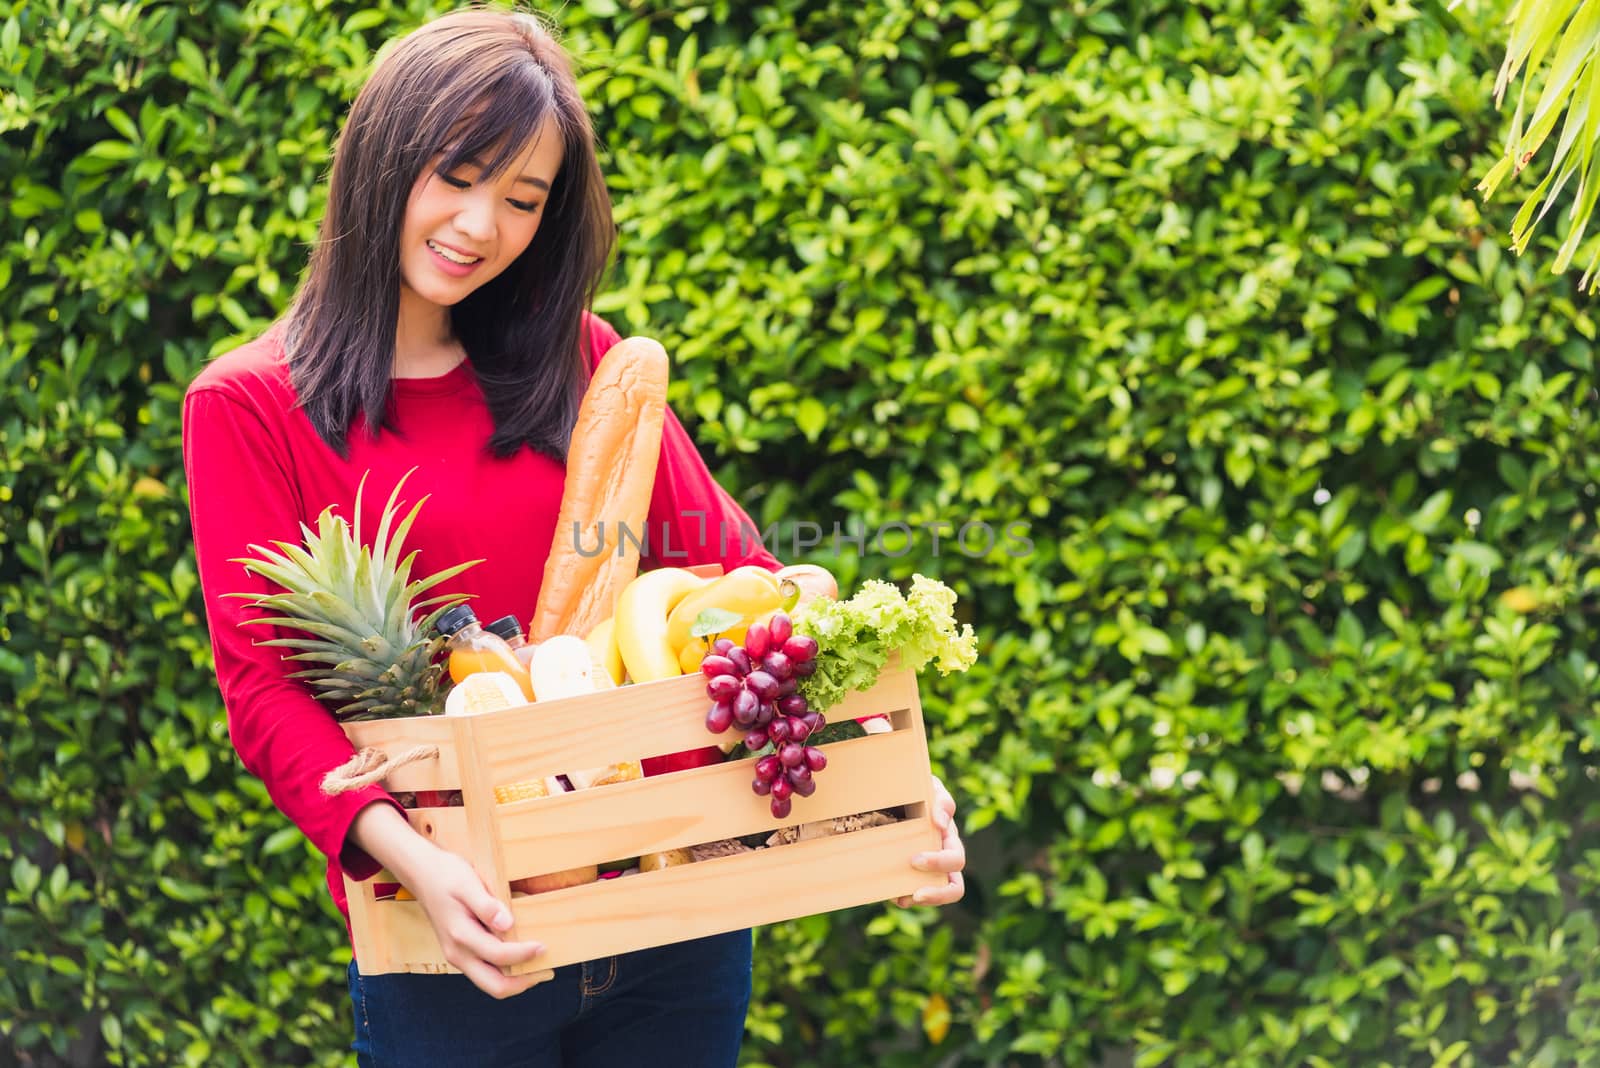 Portrait of Asian beautiful young woman farmer standing she smile and holding full fresh food raw vegetables fruit in a wood box in her hands on green leaves background